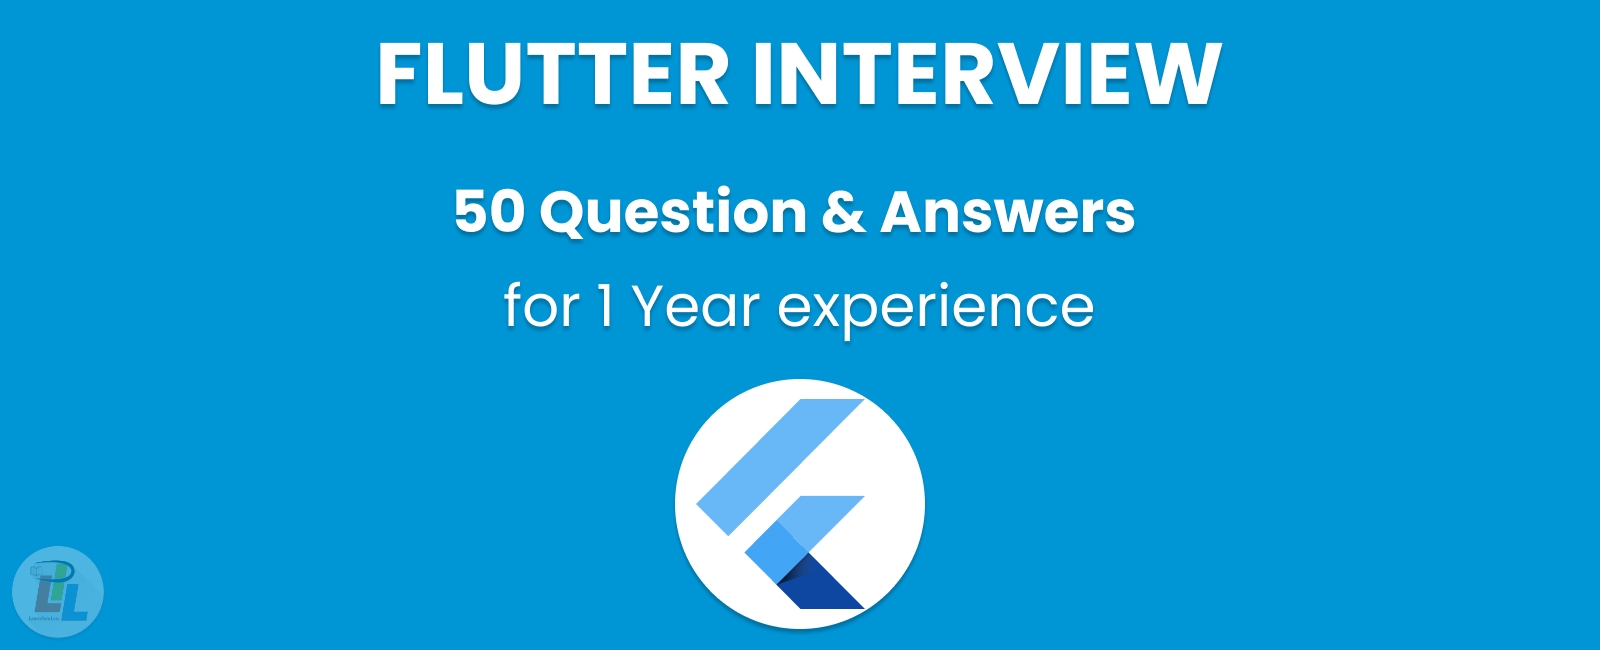 50 Flutter Interview Question for 1 year experience